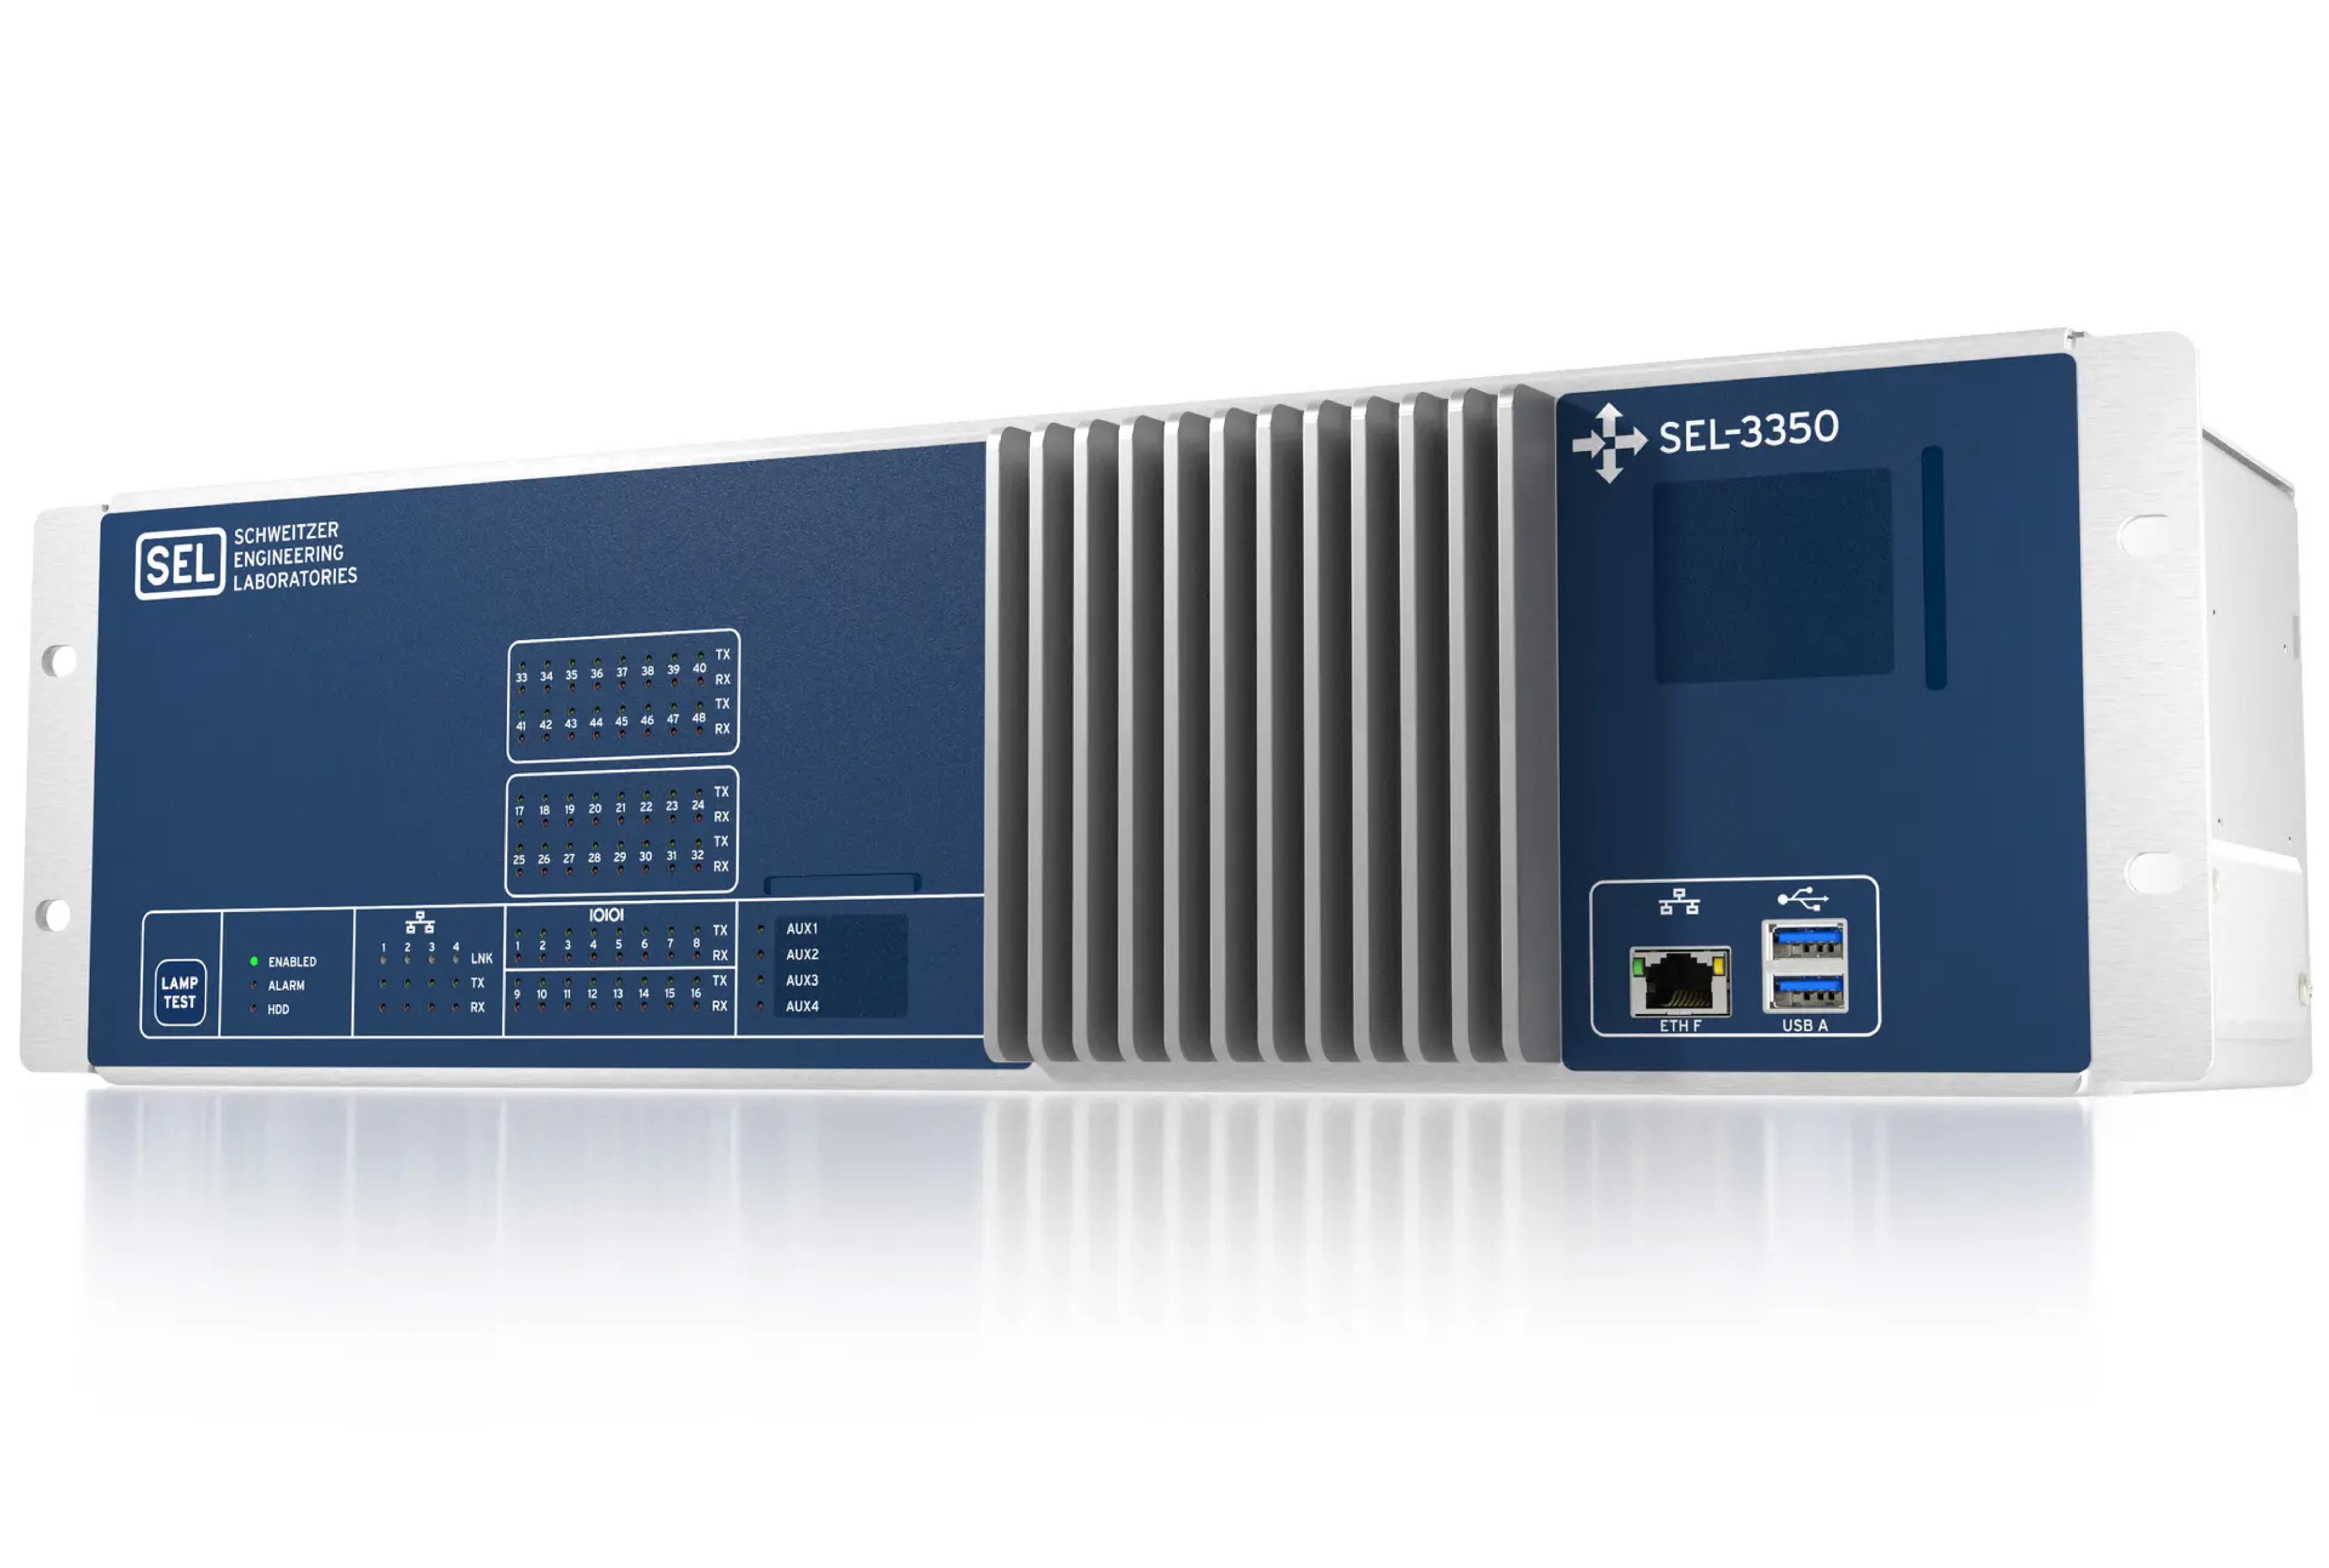 SEL-3350 3U joins the SEL automation family